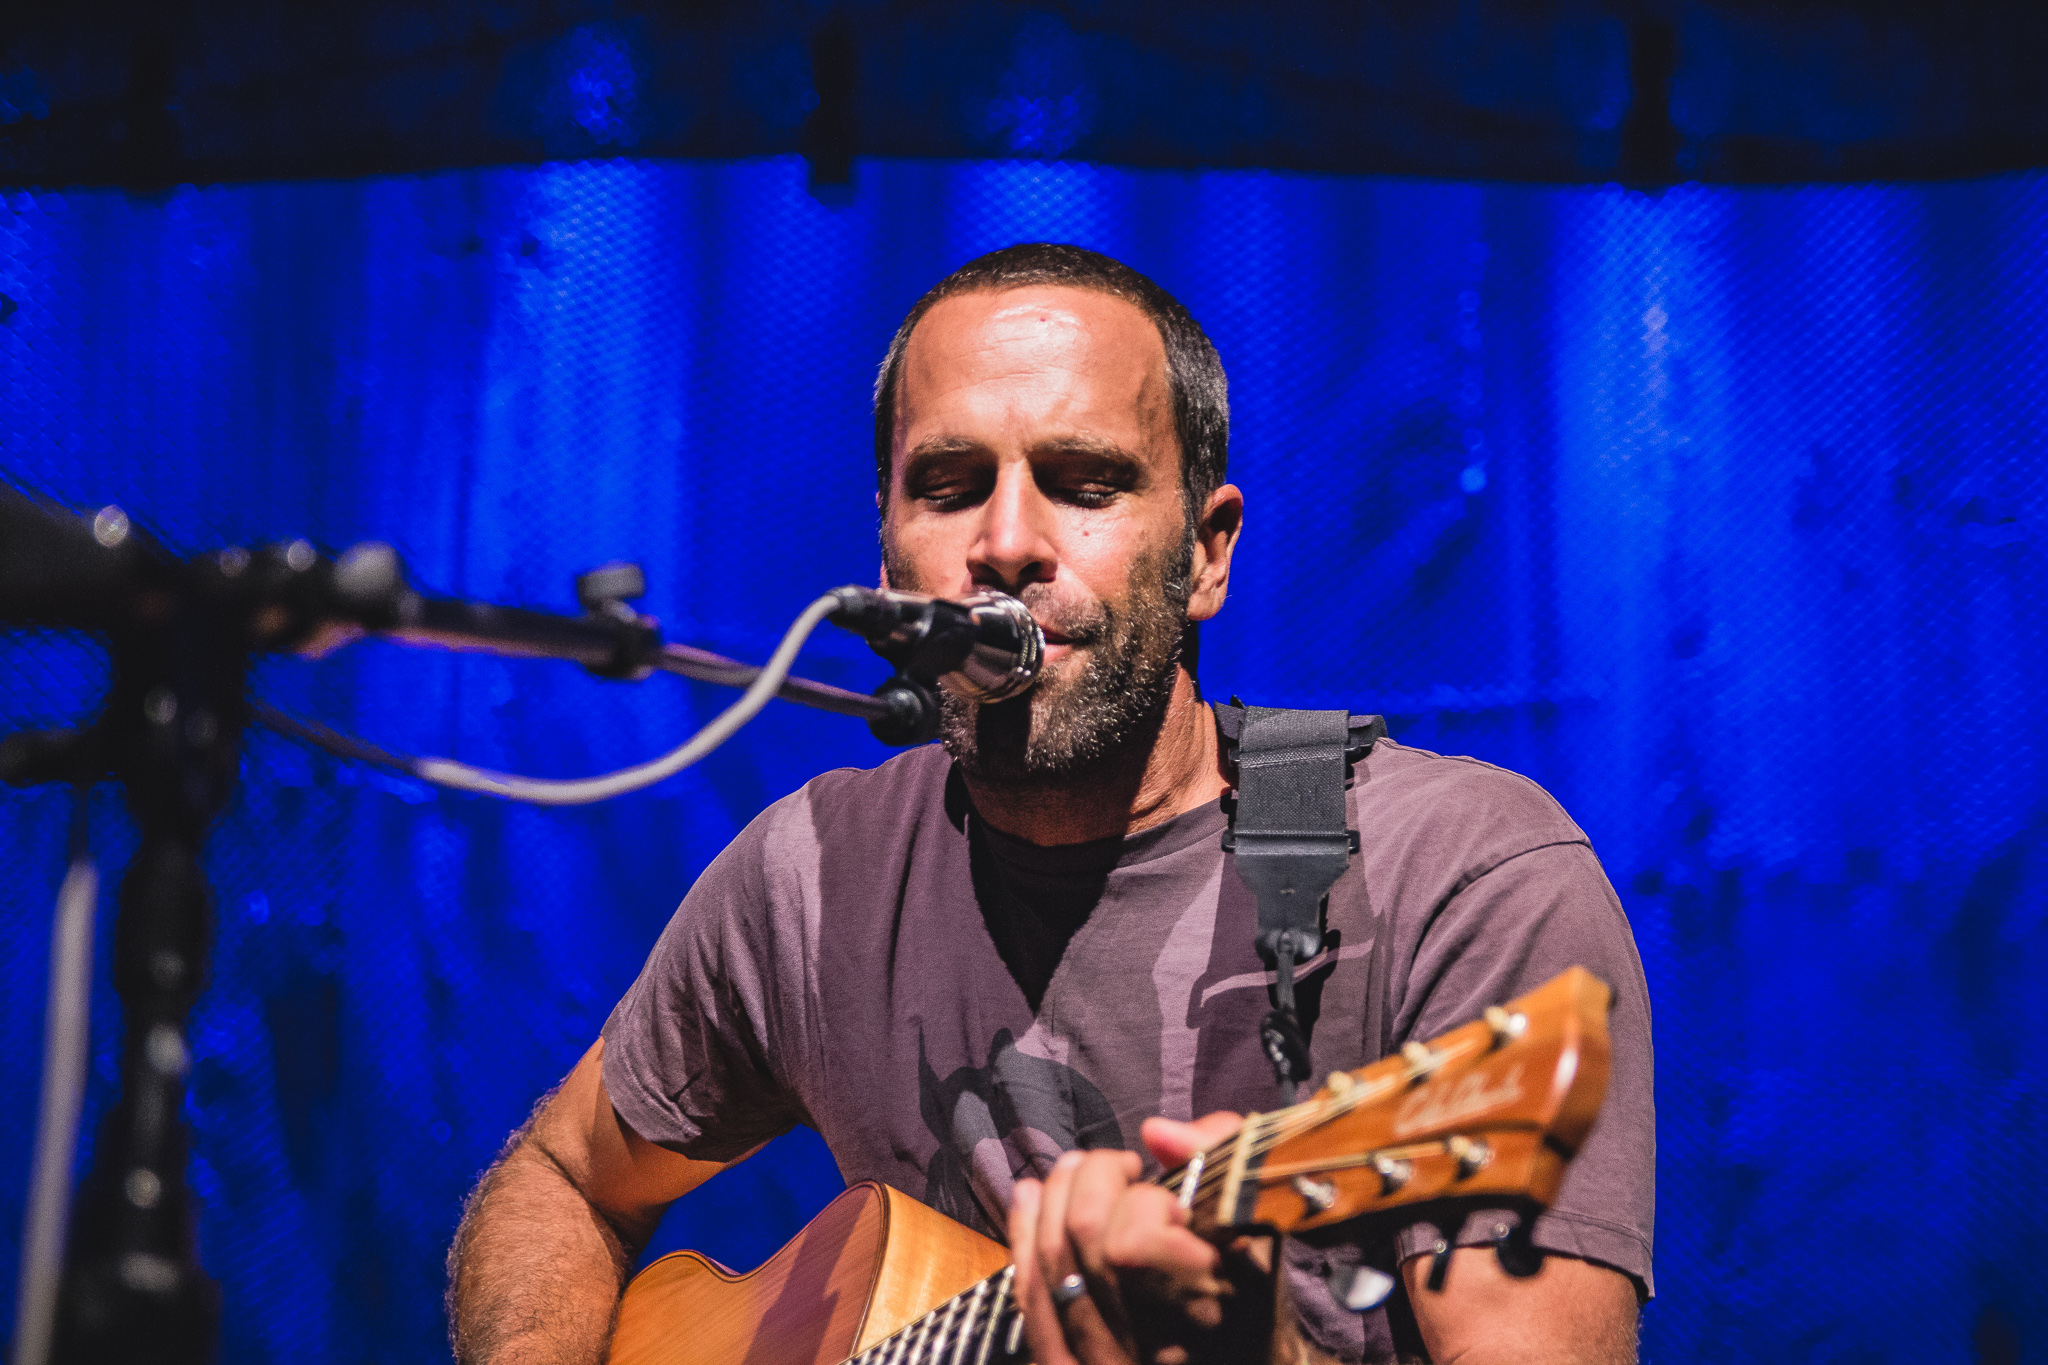 Gallery Jack Johnson Live Riverstage Yeah But Seriously Thoughyeah But Seriously Though